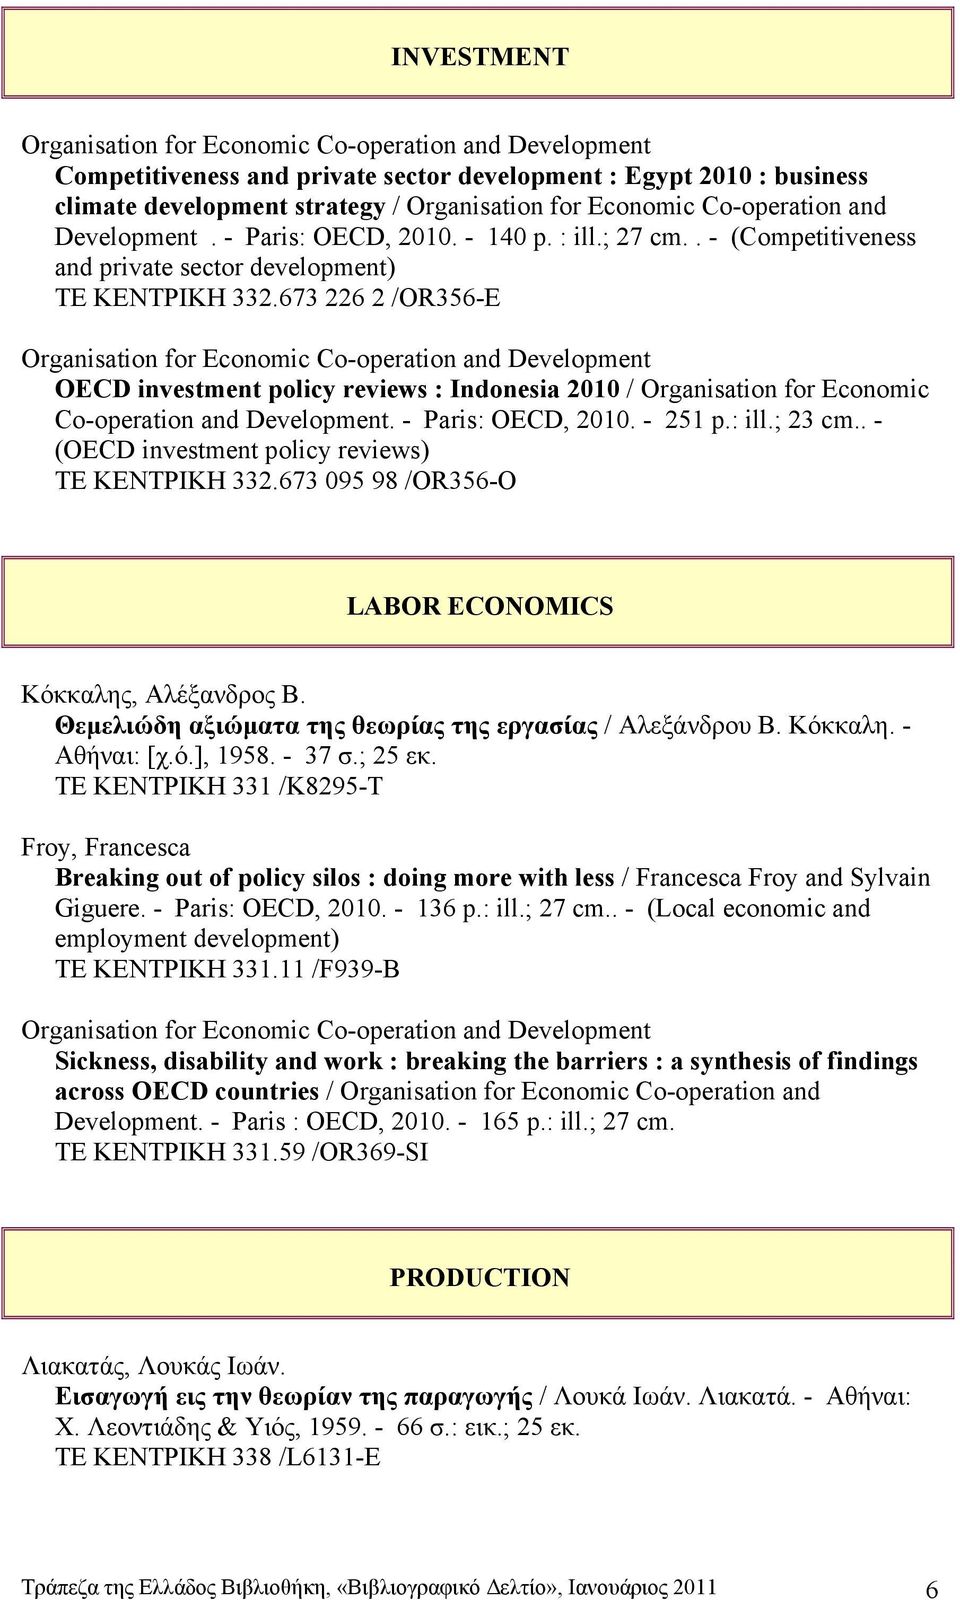 673 226 2 /OR356-E OECD investment policy reviews : Indonesia 2010 / Organisation for Economic Co-operation and Development. - Paris: OECD, 2010. - 251 p.: ill.; 23 cm.